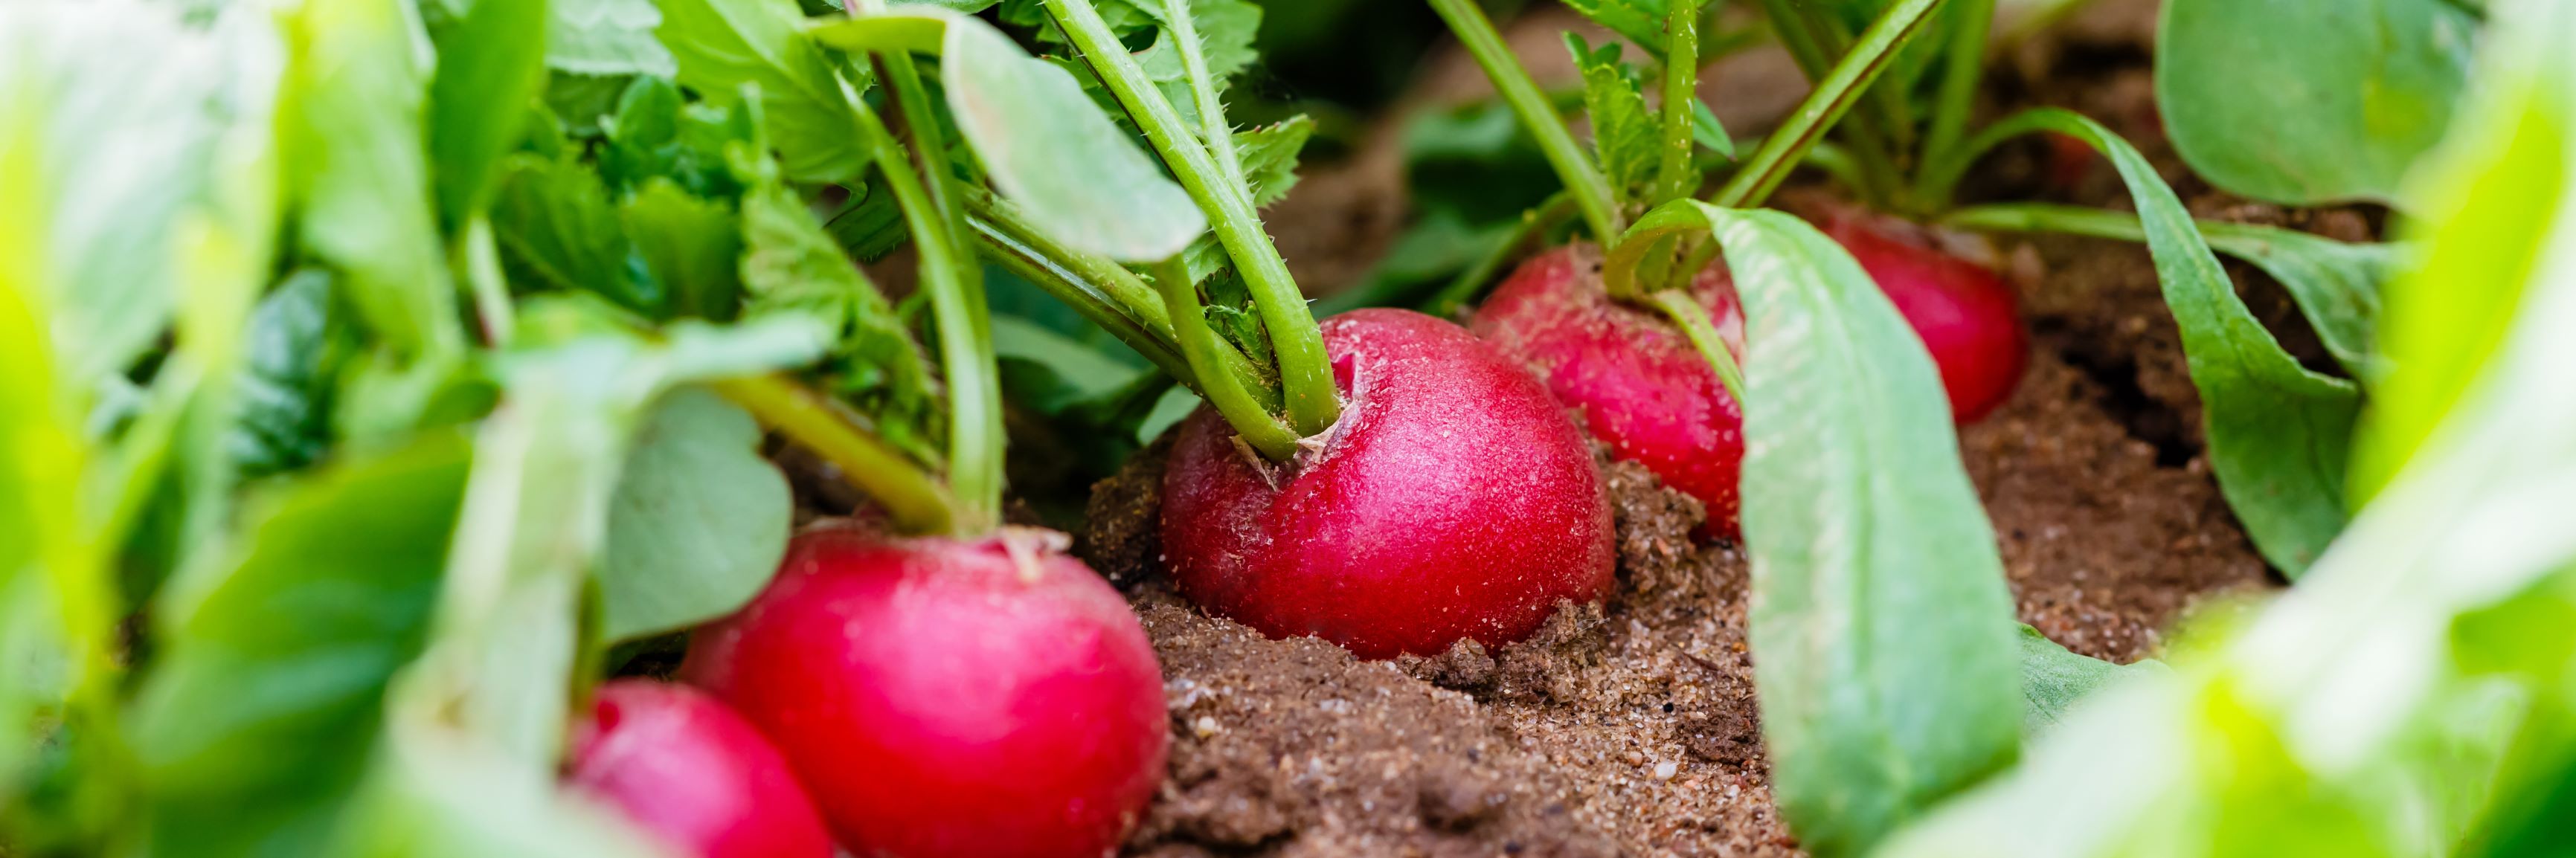 Radishes in the vegetable patch